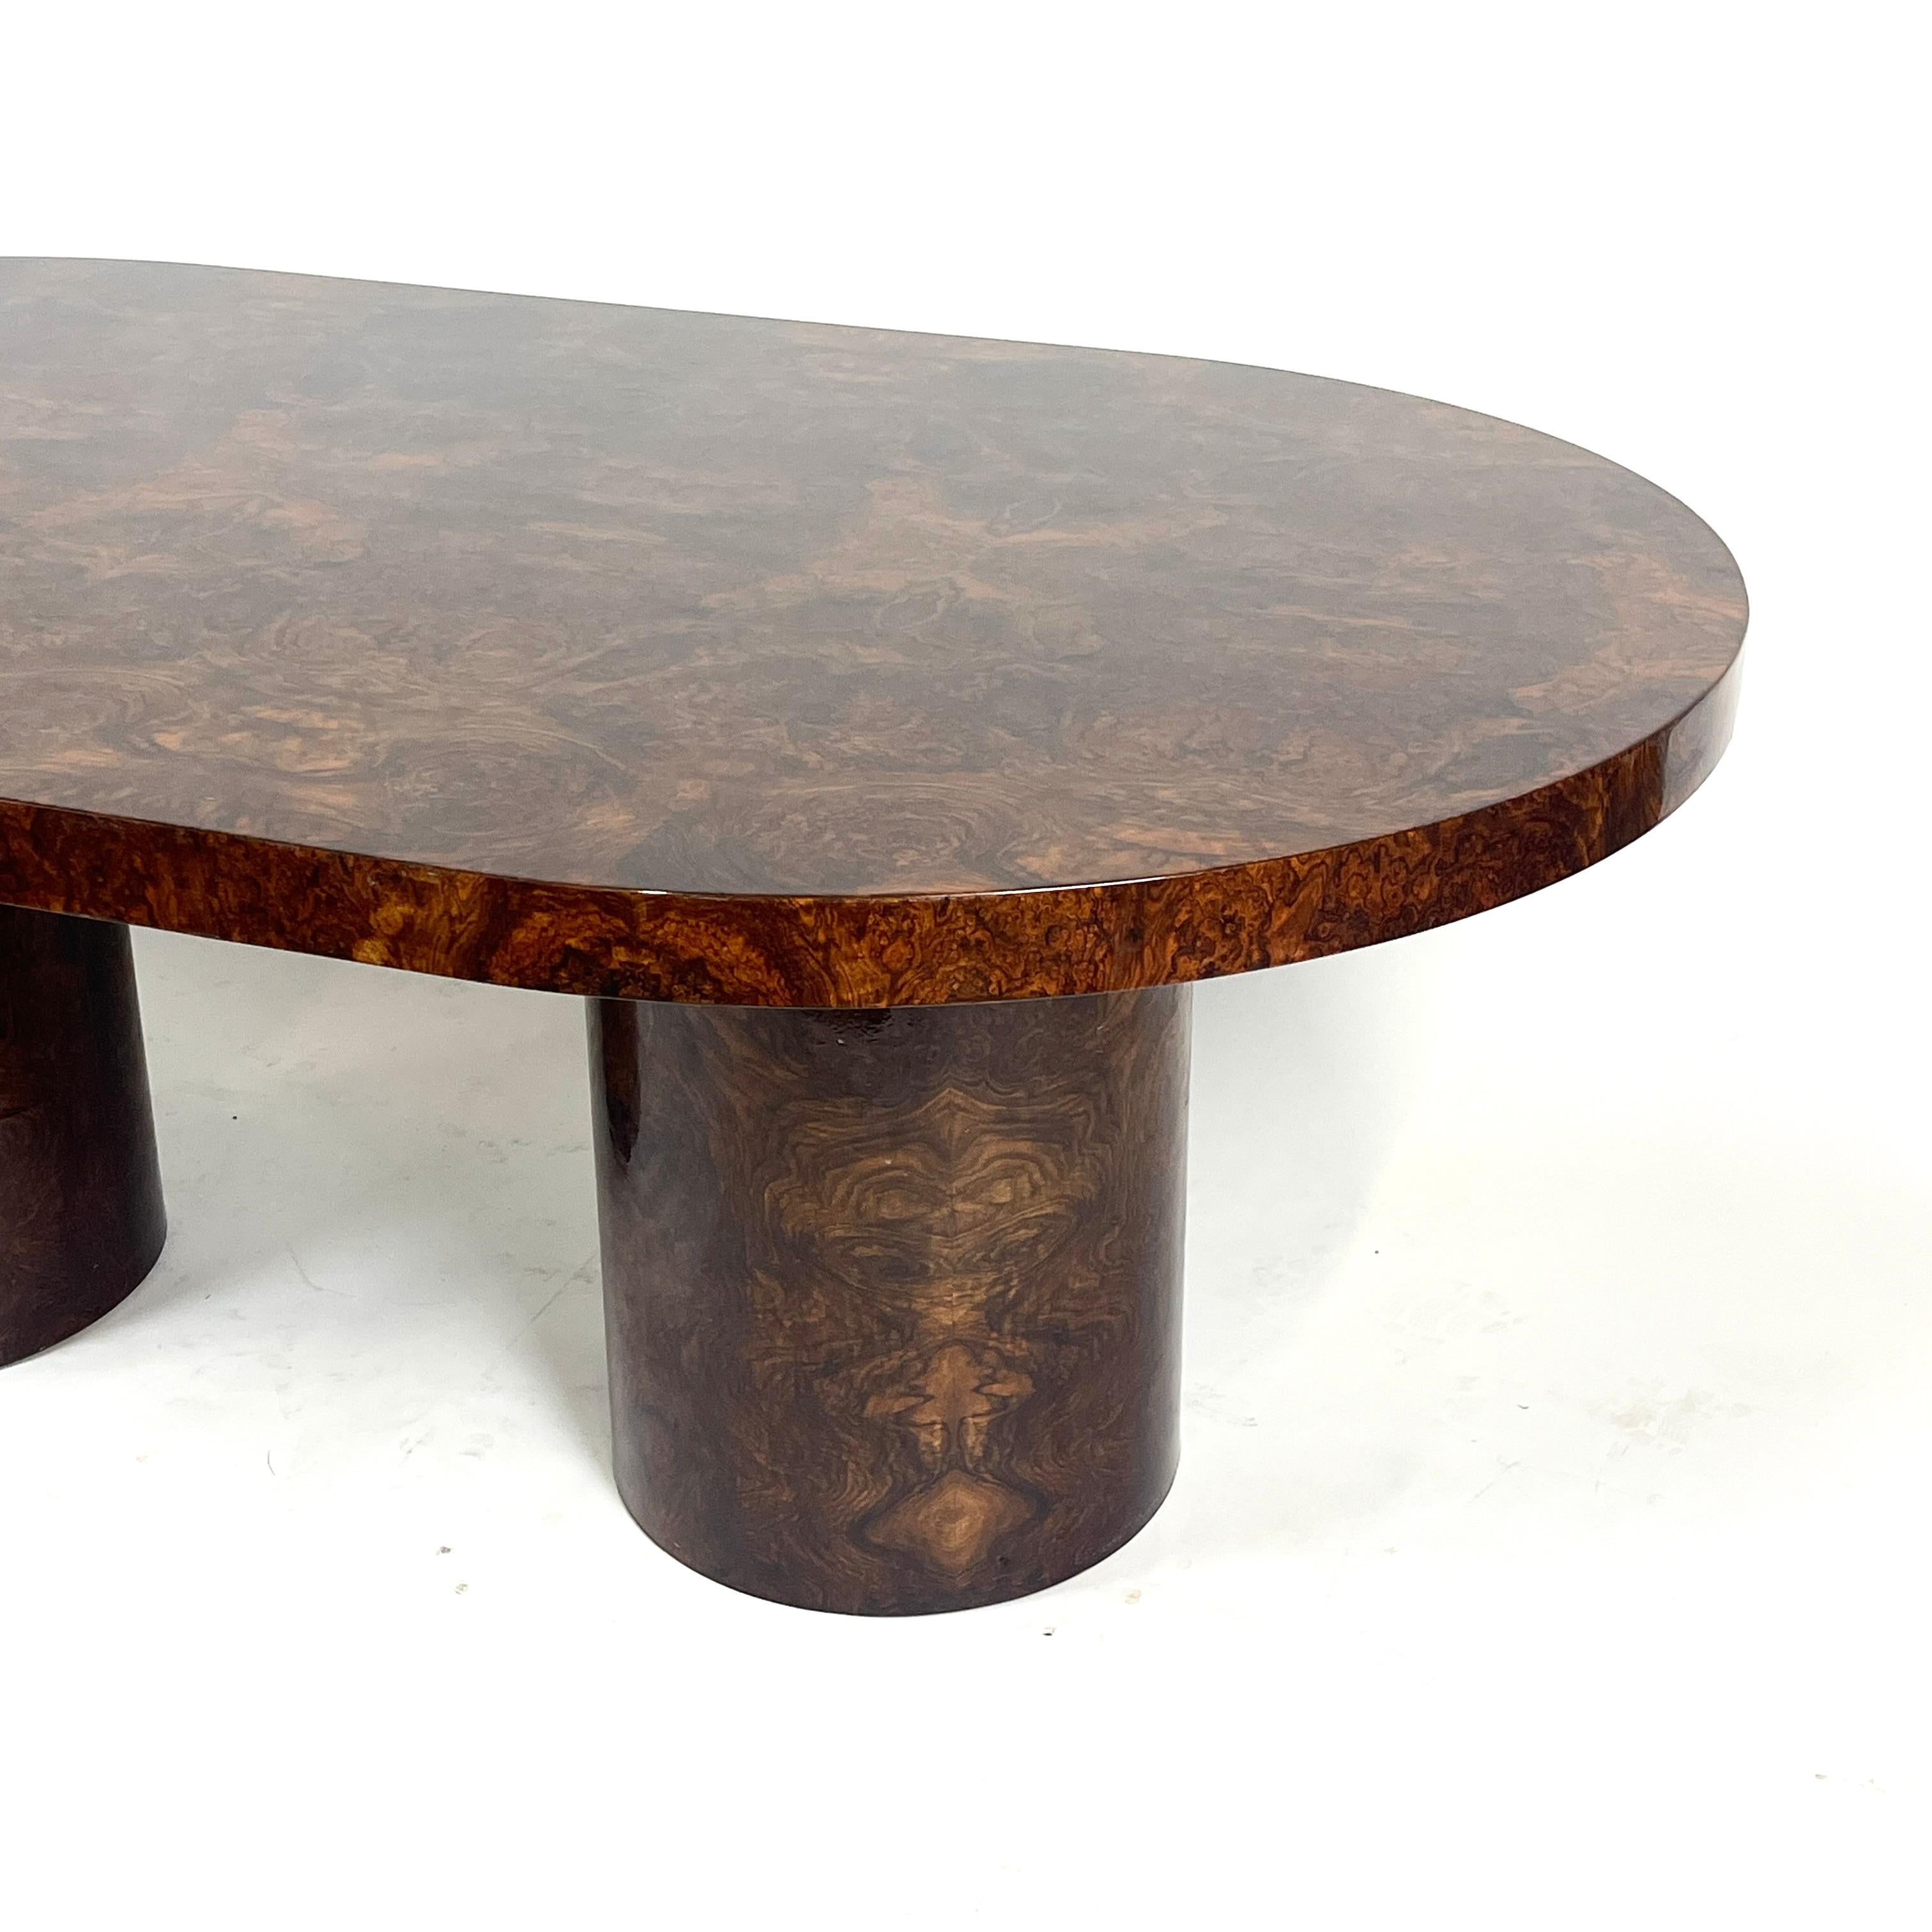 Lacquered Burled Mahogany Oval Dining Table by Paul Mayen for Intrex Habitat 2